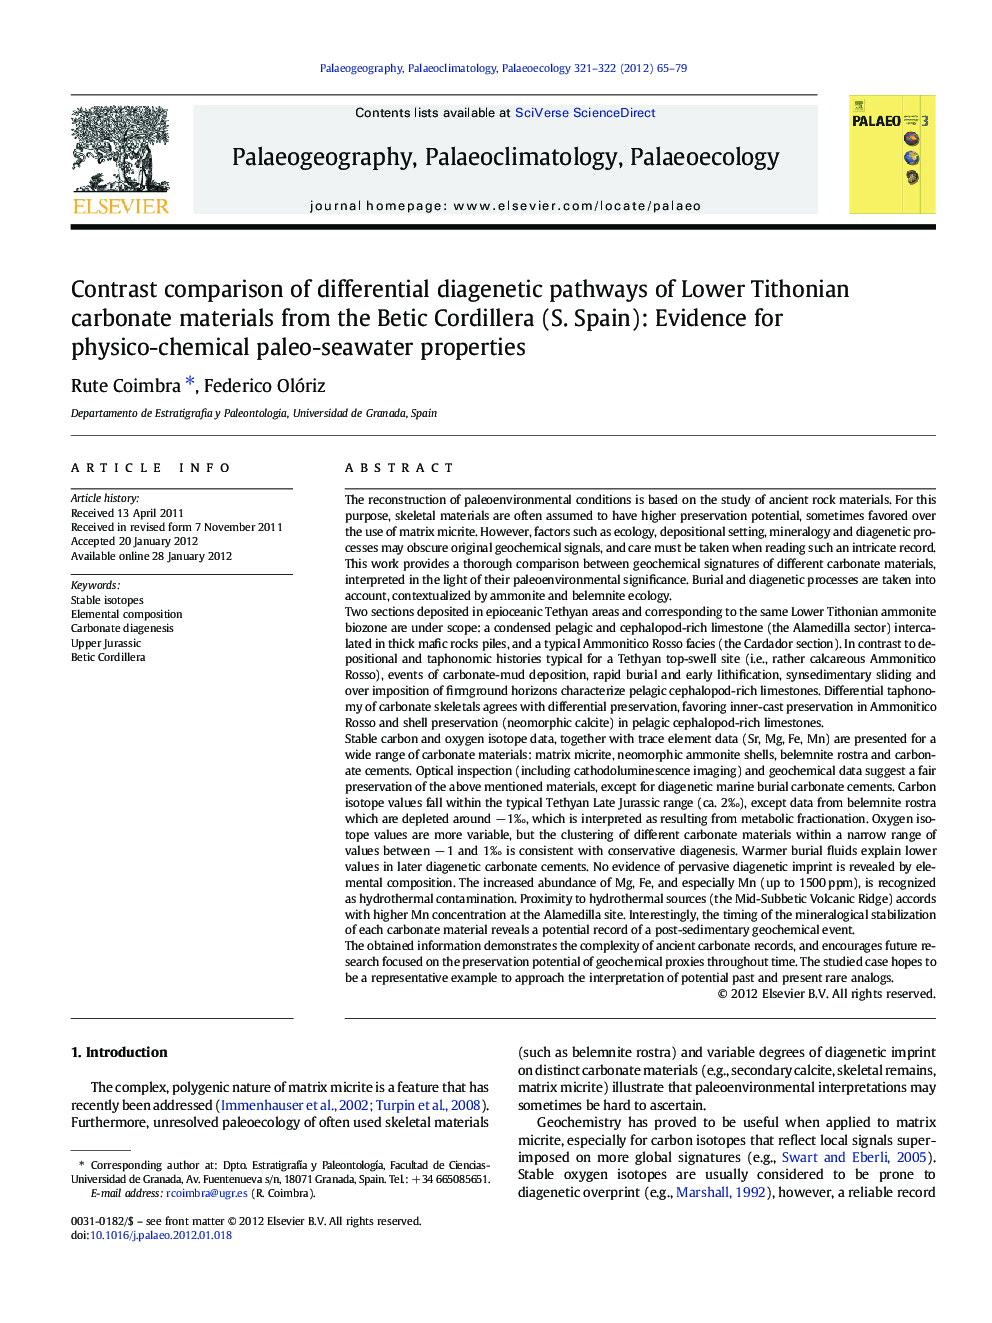 Contrast comparison of differential diagenetic pathways of Lower Tithonian carbonate materials from the Betic Cordillera (S. Spain): Evidence for physico-chemical paleo-seawater properties